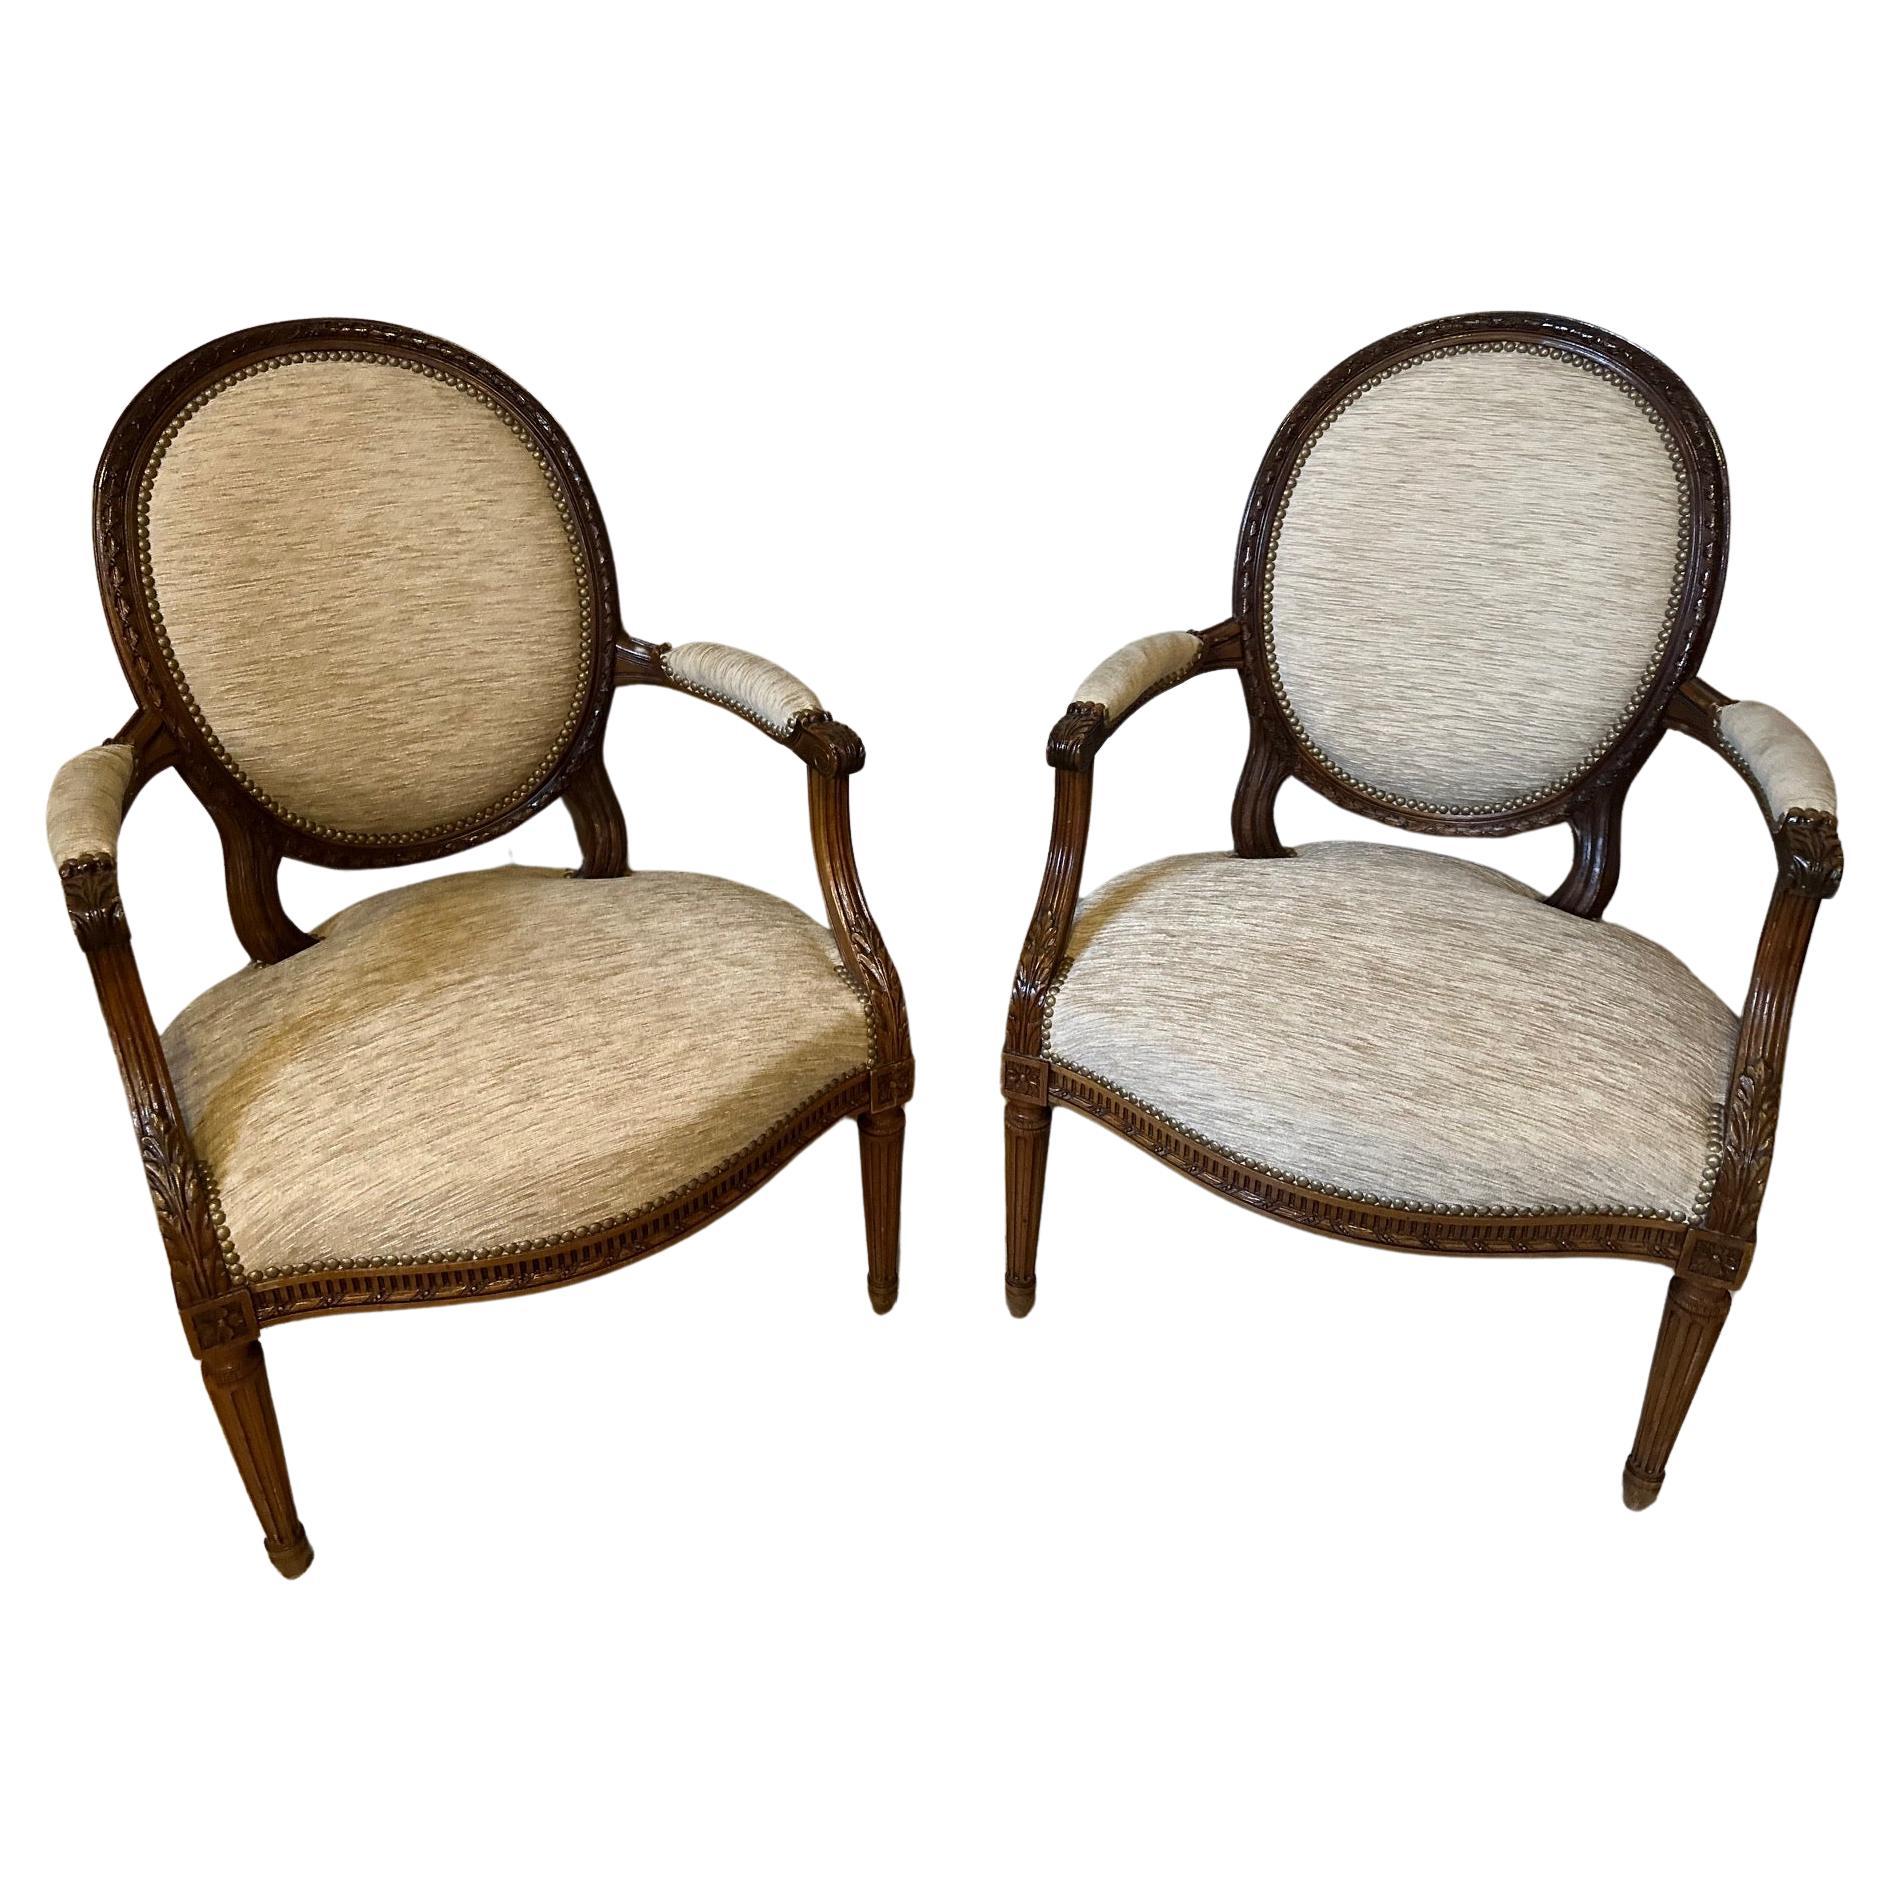 Early 20th century French Pair of Louis XVI Style Armchair, 1900s For Sale